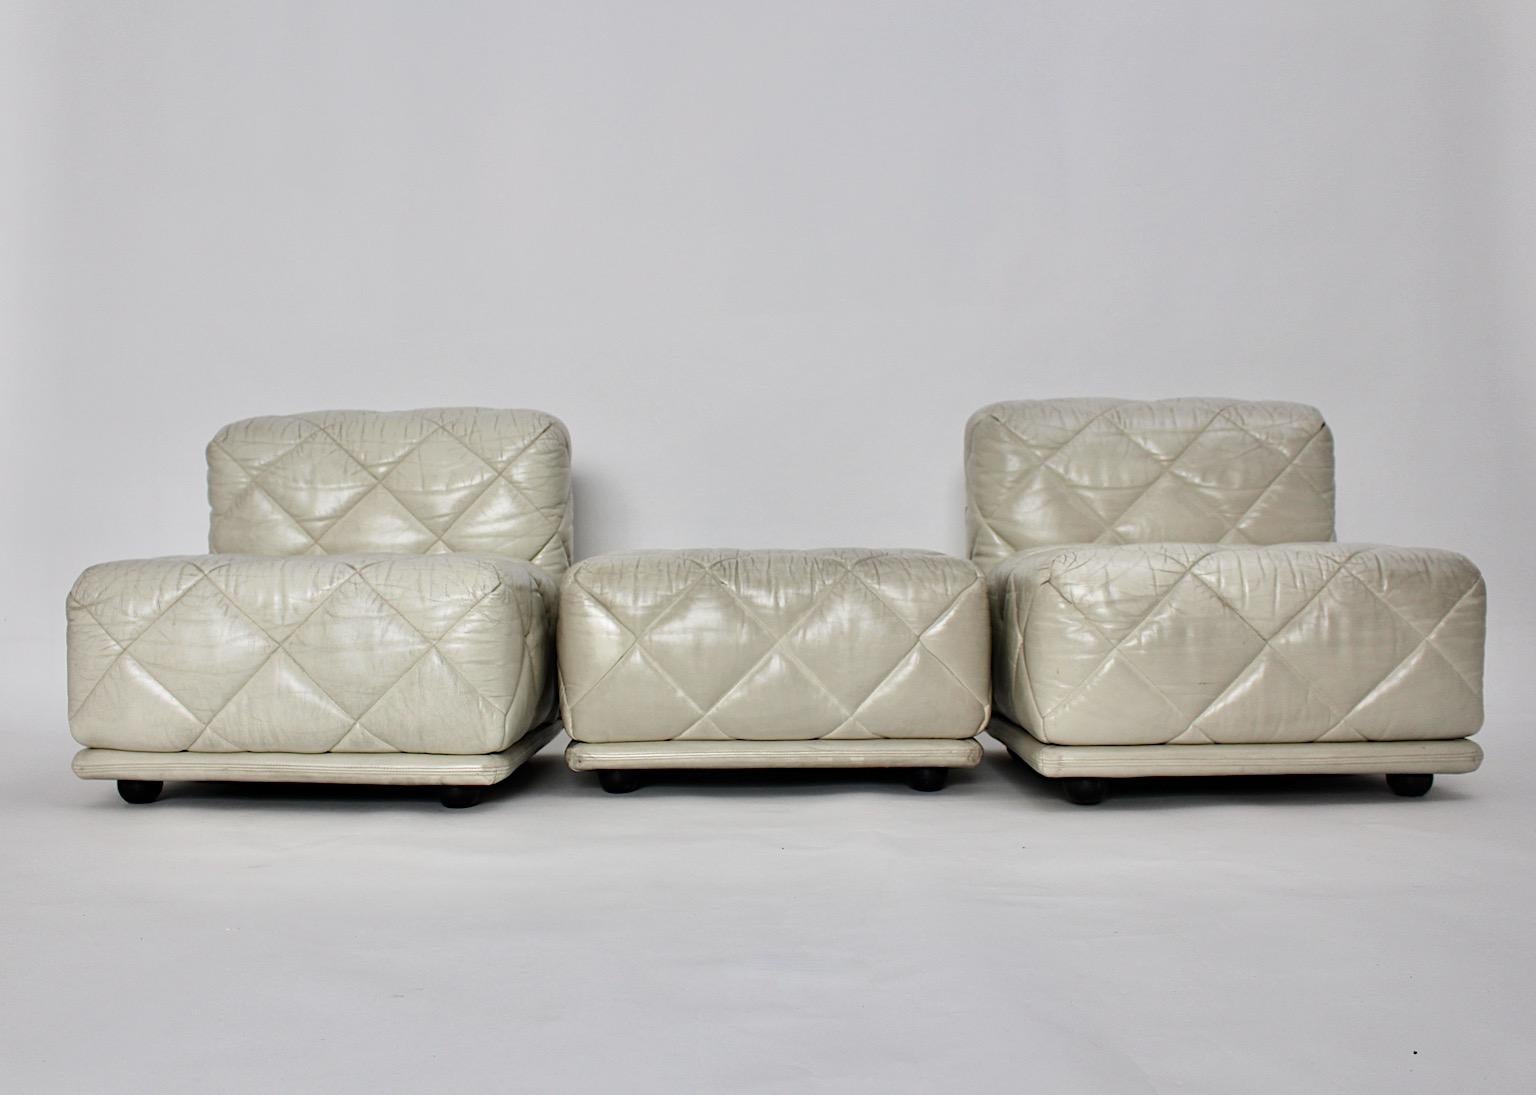 Space Age vintage sectional two lounge chairs with one stool from leather in ivory color tone 1970s by Wittmann Austria.
The very comfortable settee model Rhombos features stitched leather in butter cream color, which flatters to each